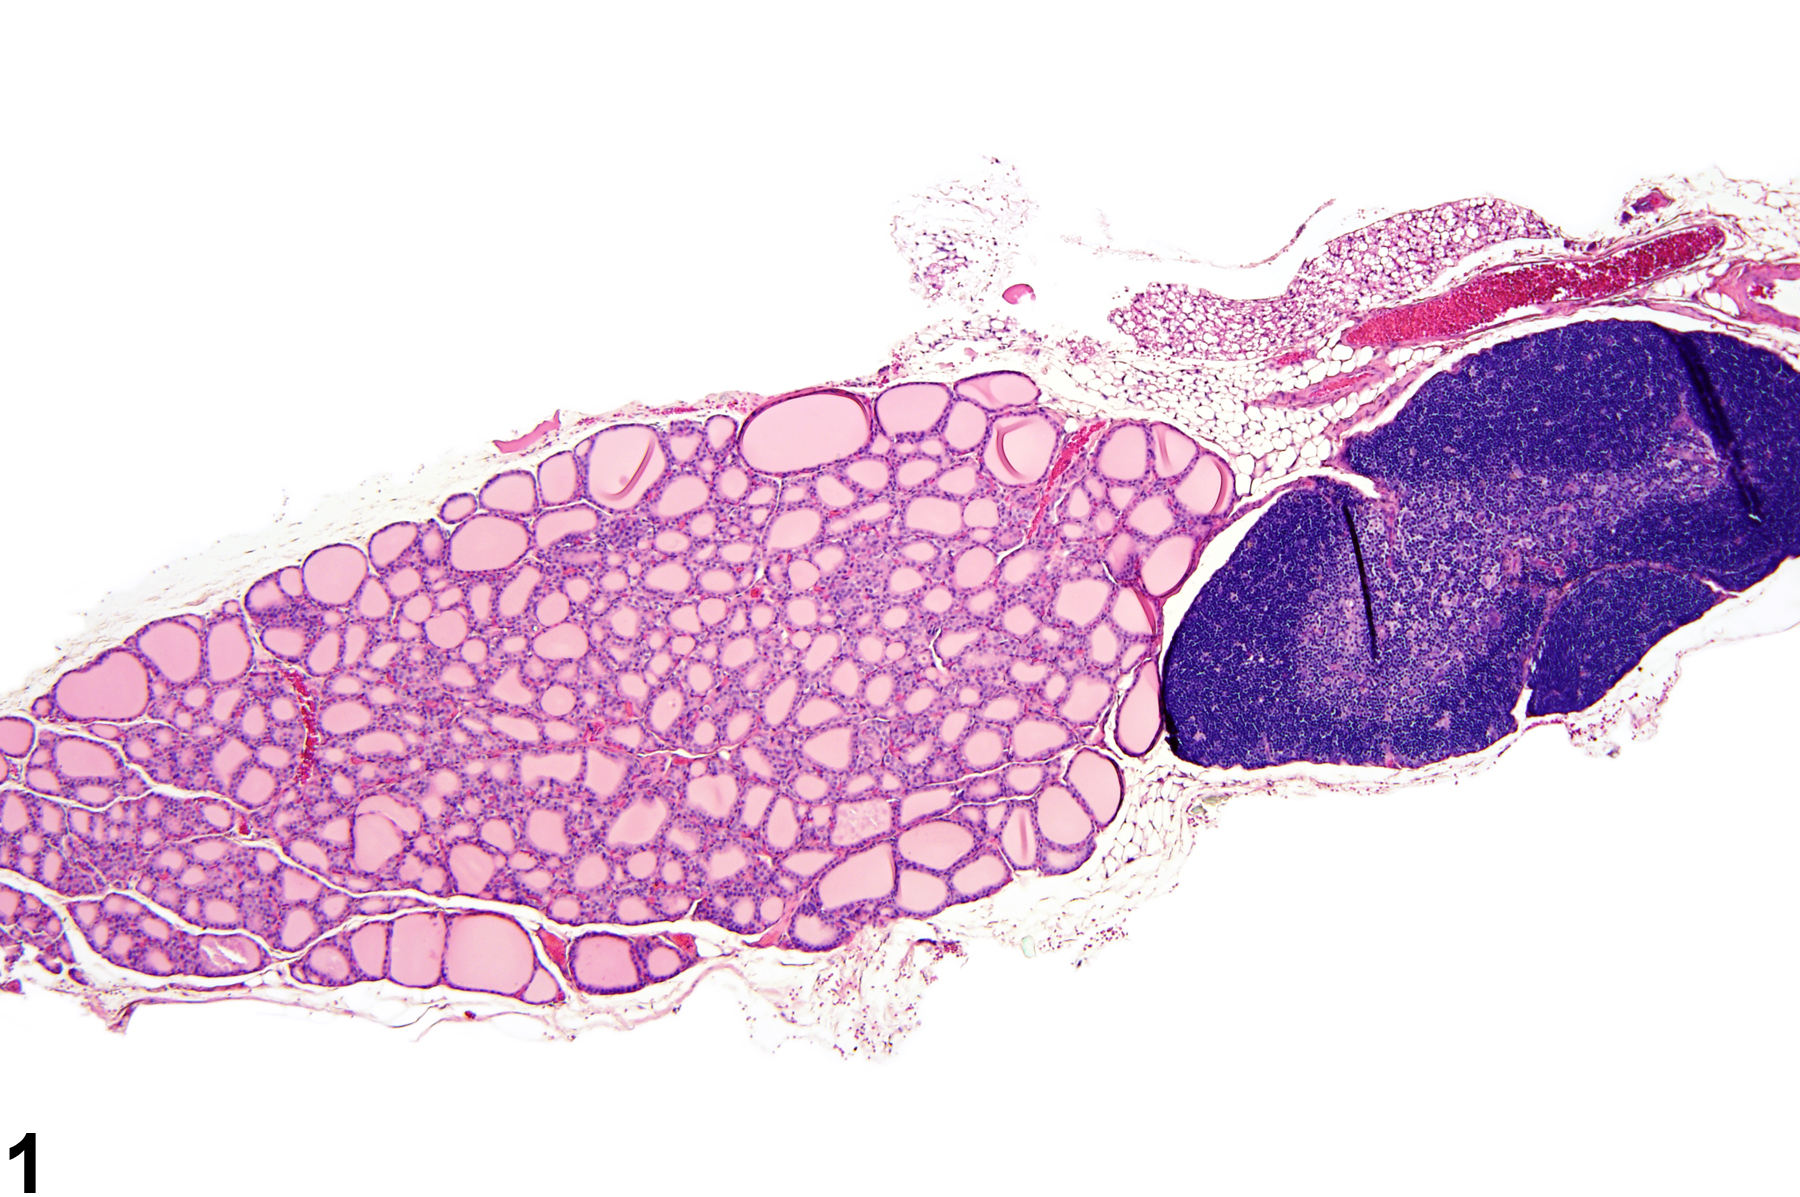 Image of ectopic tissue in the thyroid gland from a female F344/N rat in a subchronic study